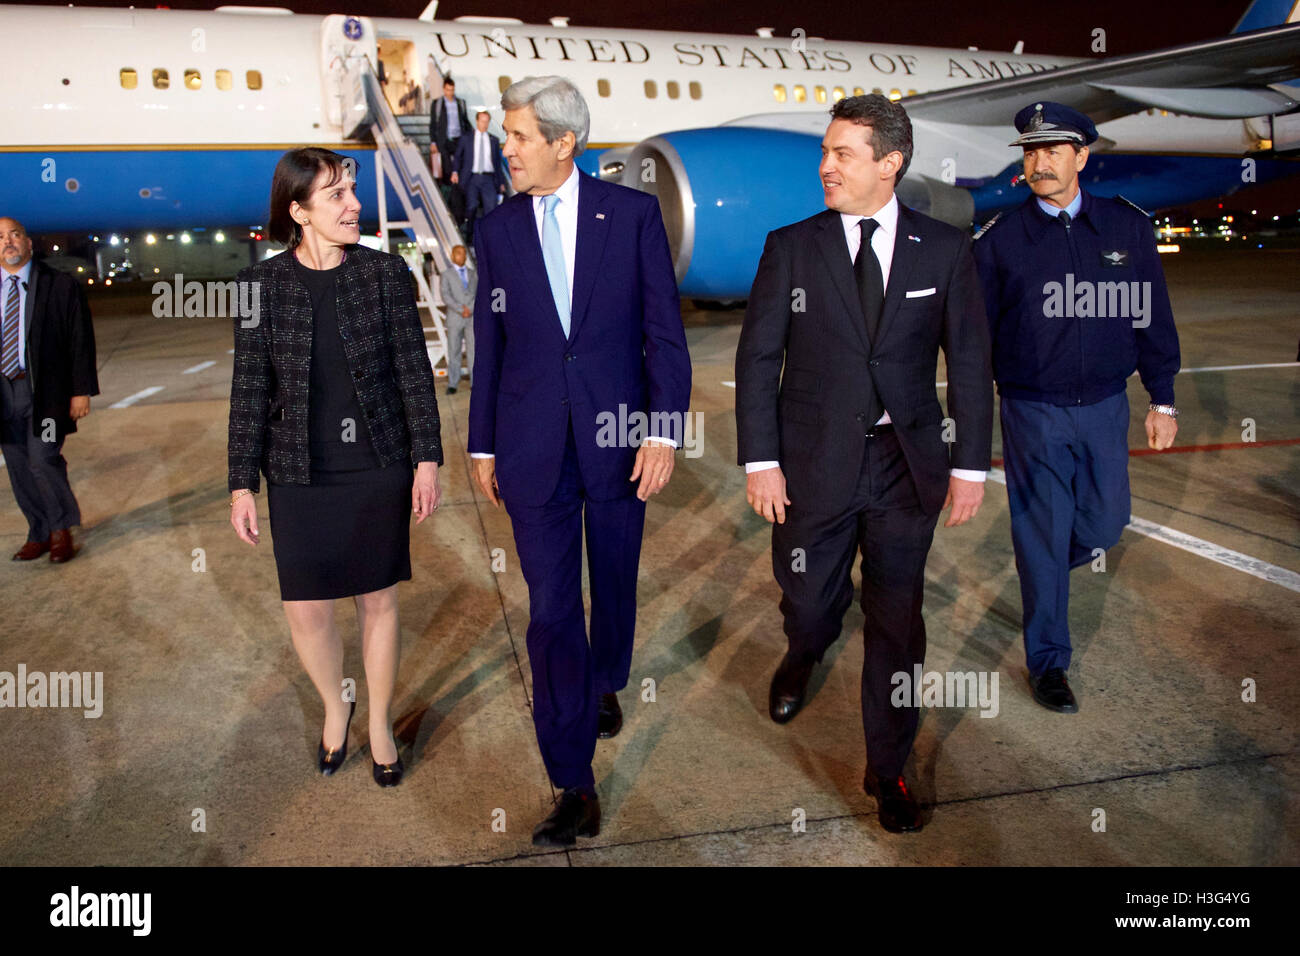 U.S. Secretary of State John Kerry walks with Argentina National Director of Protocol Ambassador Betina de Fonseca, and Chief of the Air Base Commodore Ruben Esteban Benza after he arrived at Jorge Newbery Airfield in Buenos Aires, Argentina, in the early morning hours of August 4, 2016, to meet with U.S. and Argentine business leaders, and for bilateral meetings with Argentina President Mauricio Macri and Foreign Minister Susana Malcorra. Stock Photo